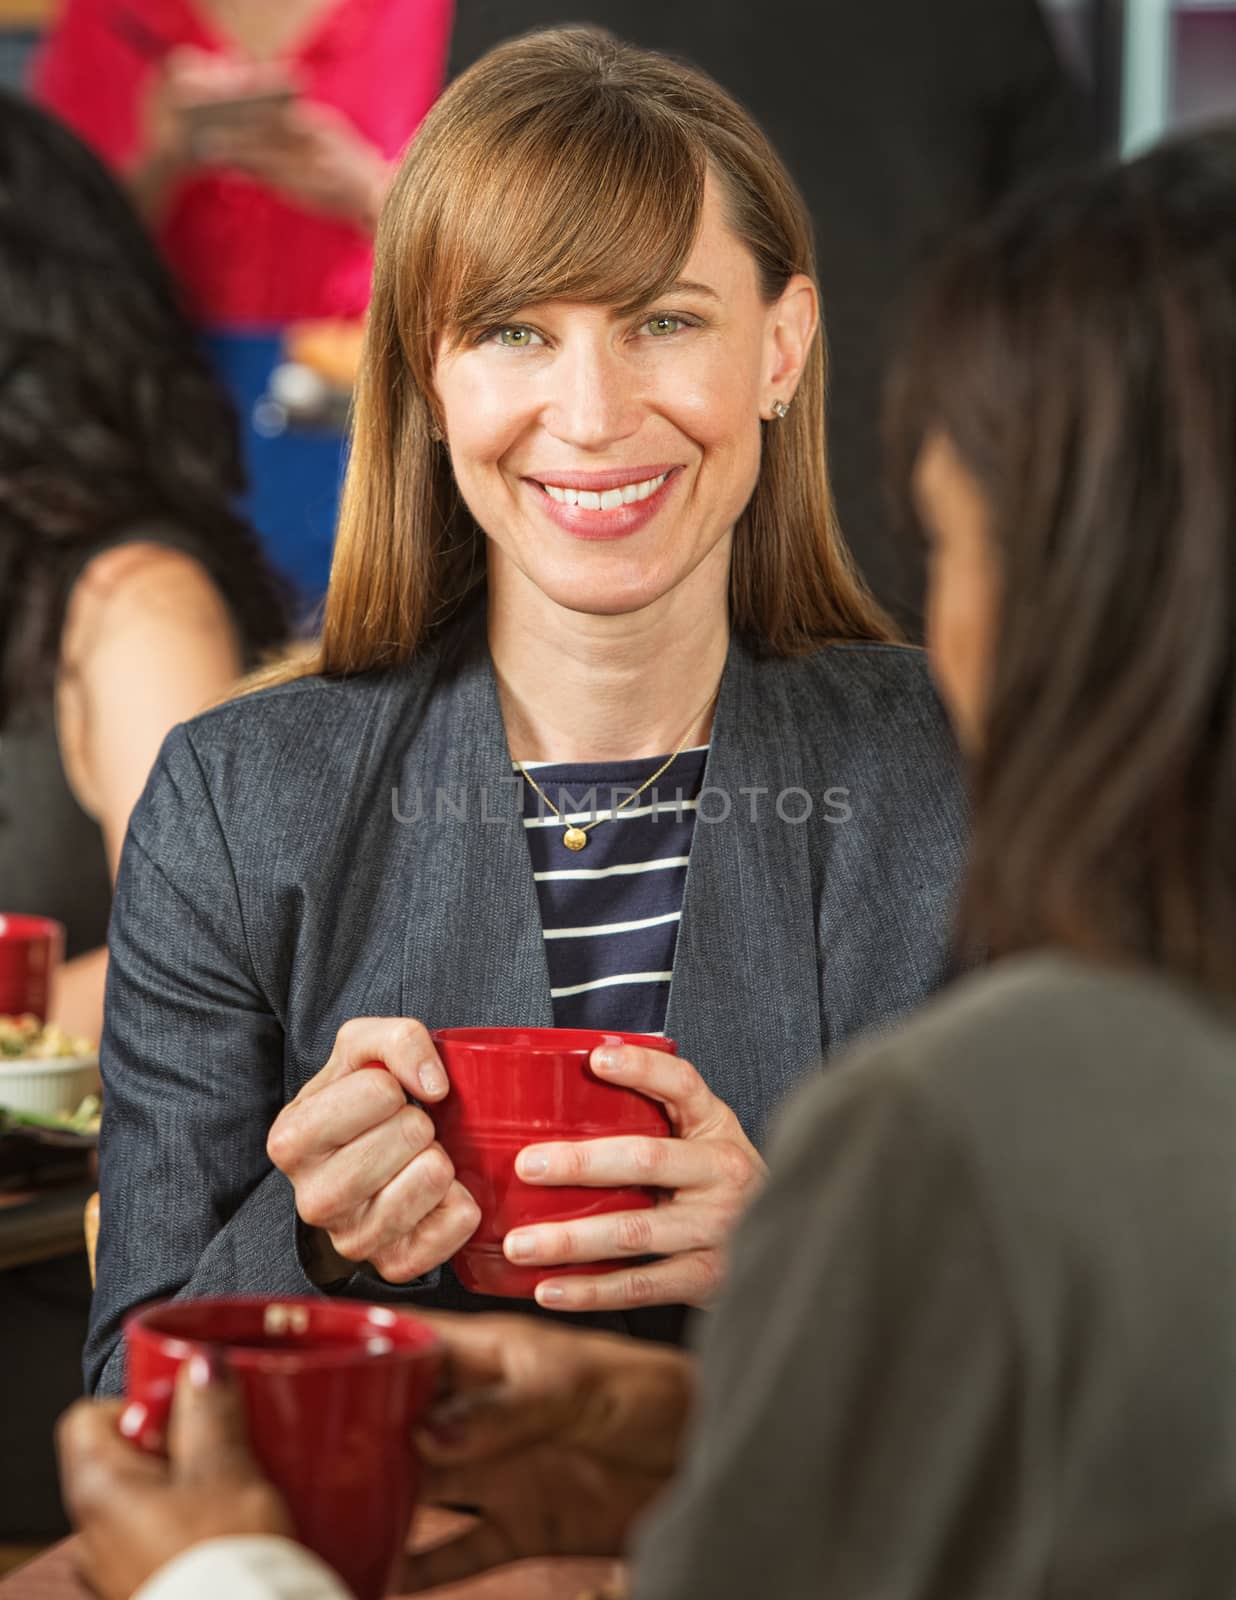 Pretty Woman in Cafe with Cup by Creatista